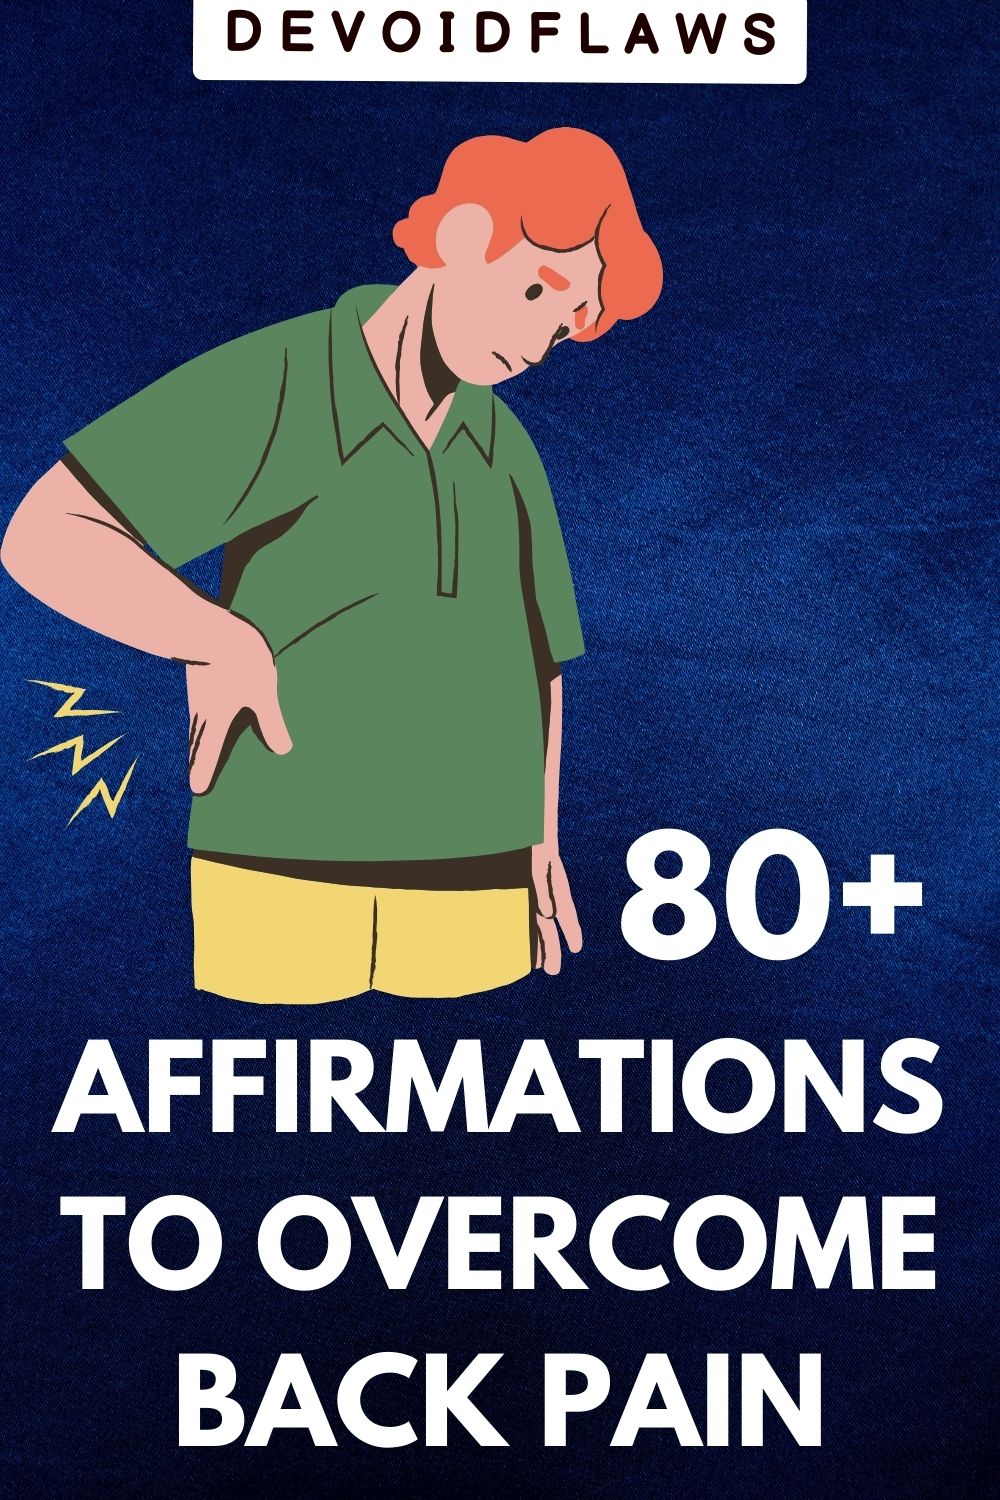 blue background image with text "80+ affirmations to overcome back pain"